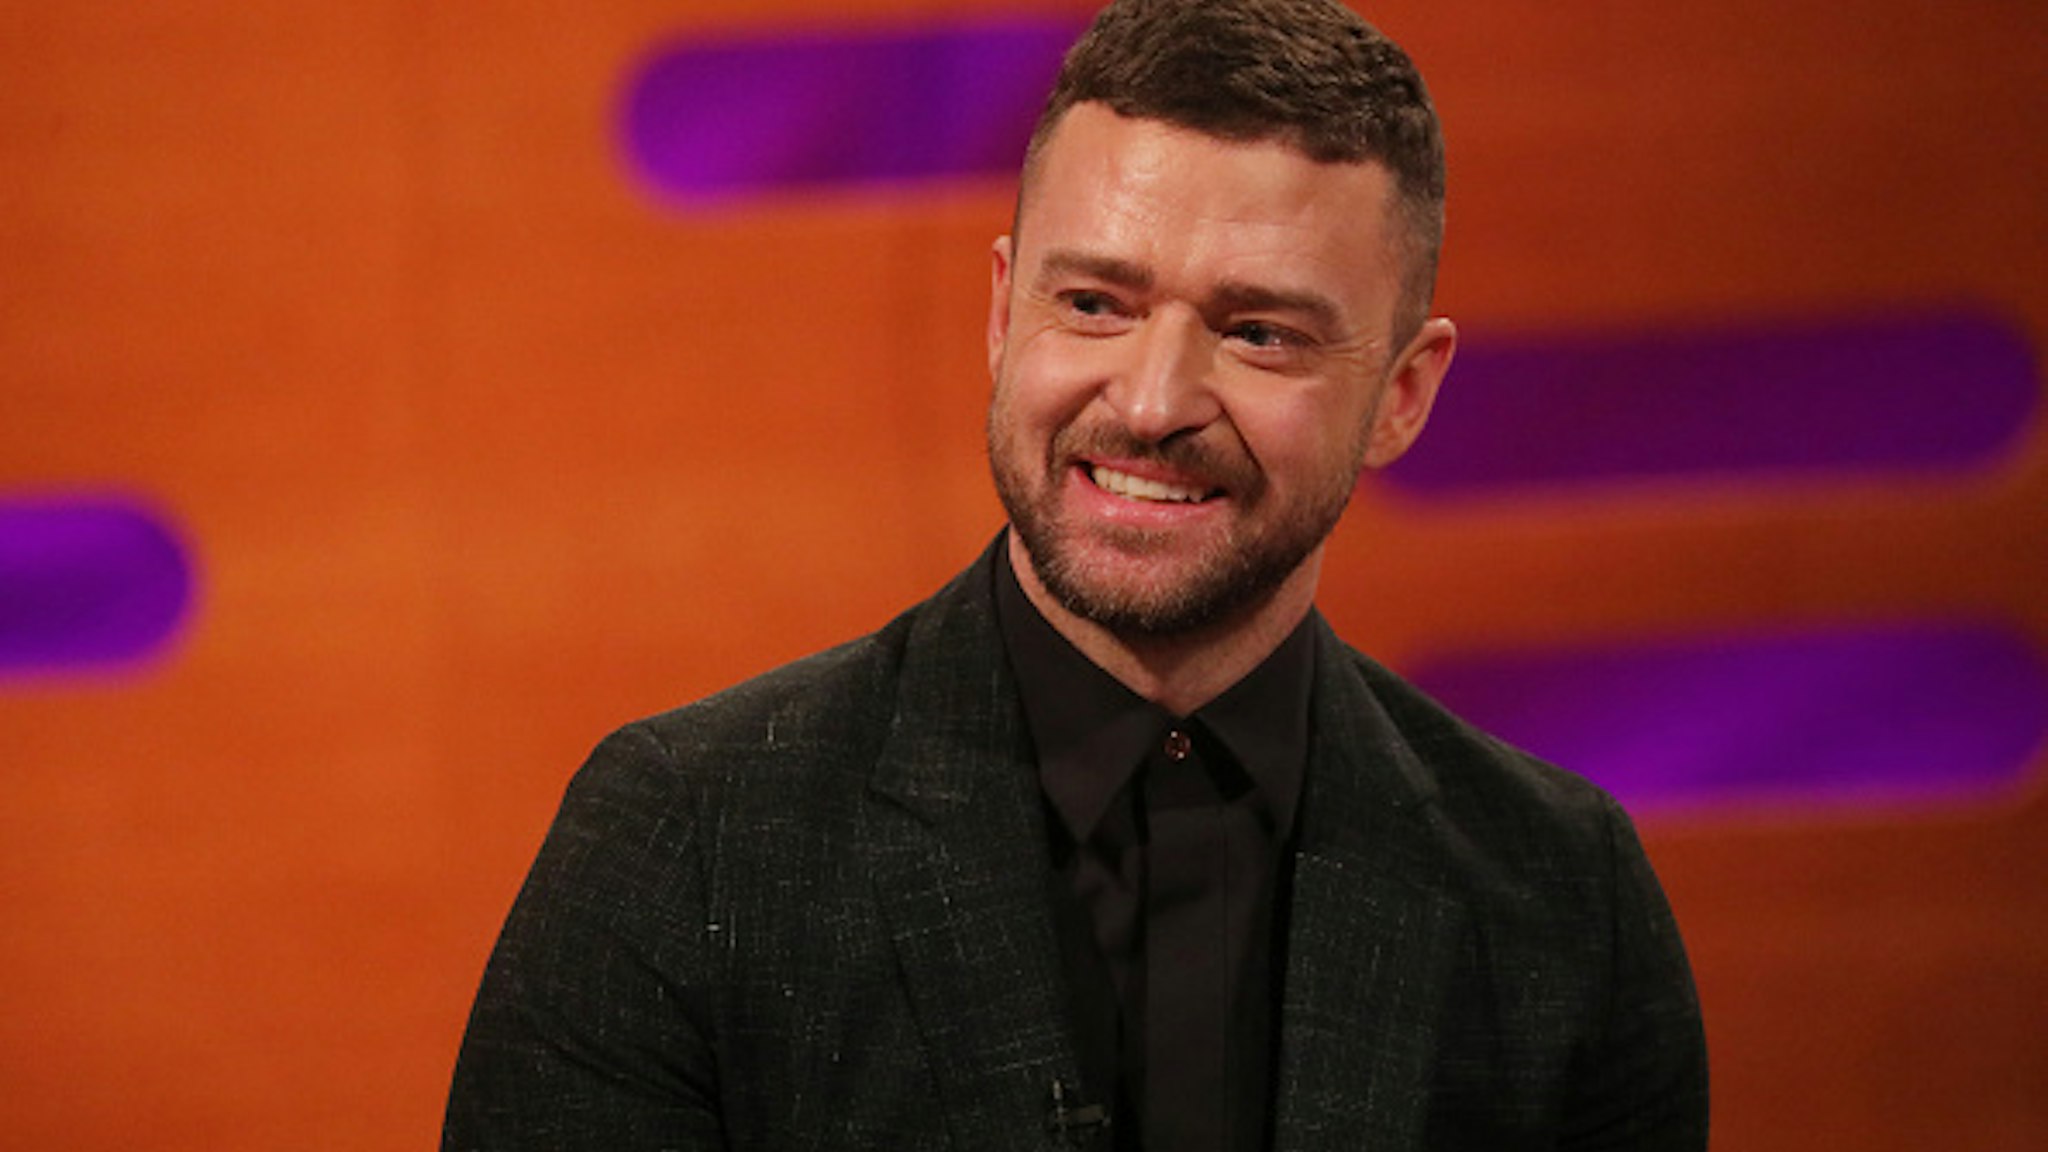 Justin Timberlake during the filming for the Graham Norton Show at BBC Studioworks 6 Television Centre, Wood Lane, London, to be aired on BBC One on Friday evening.